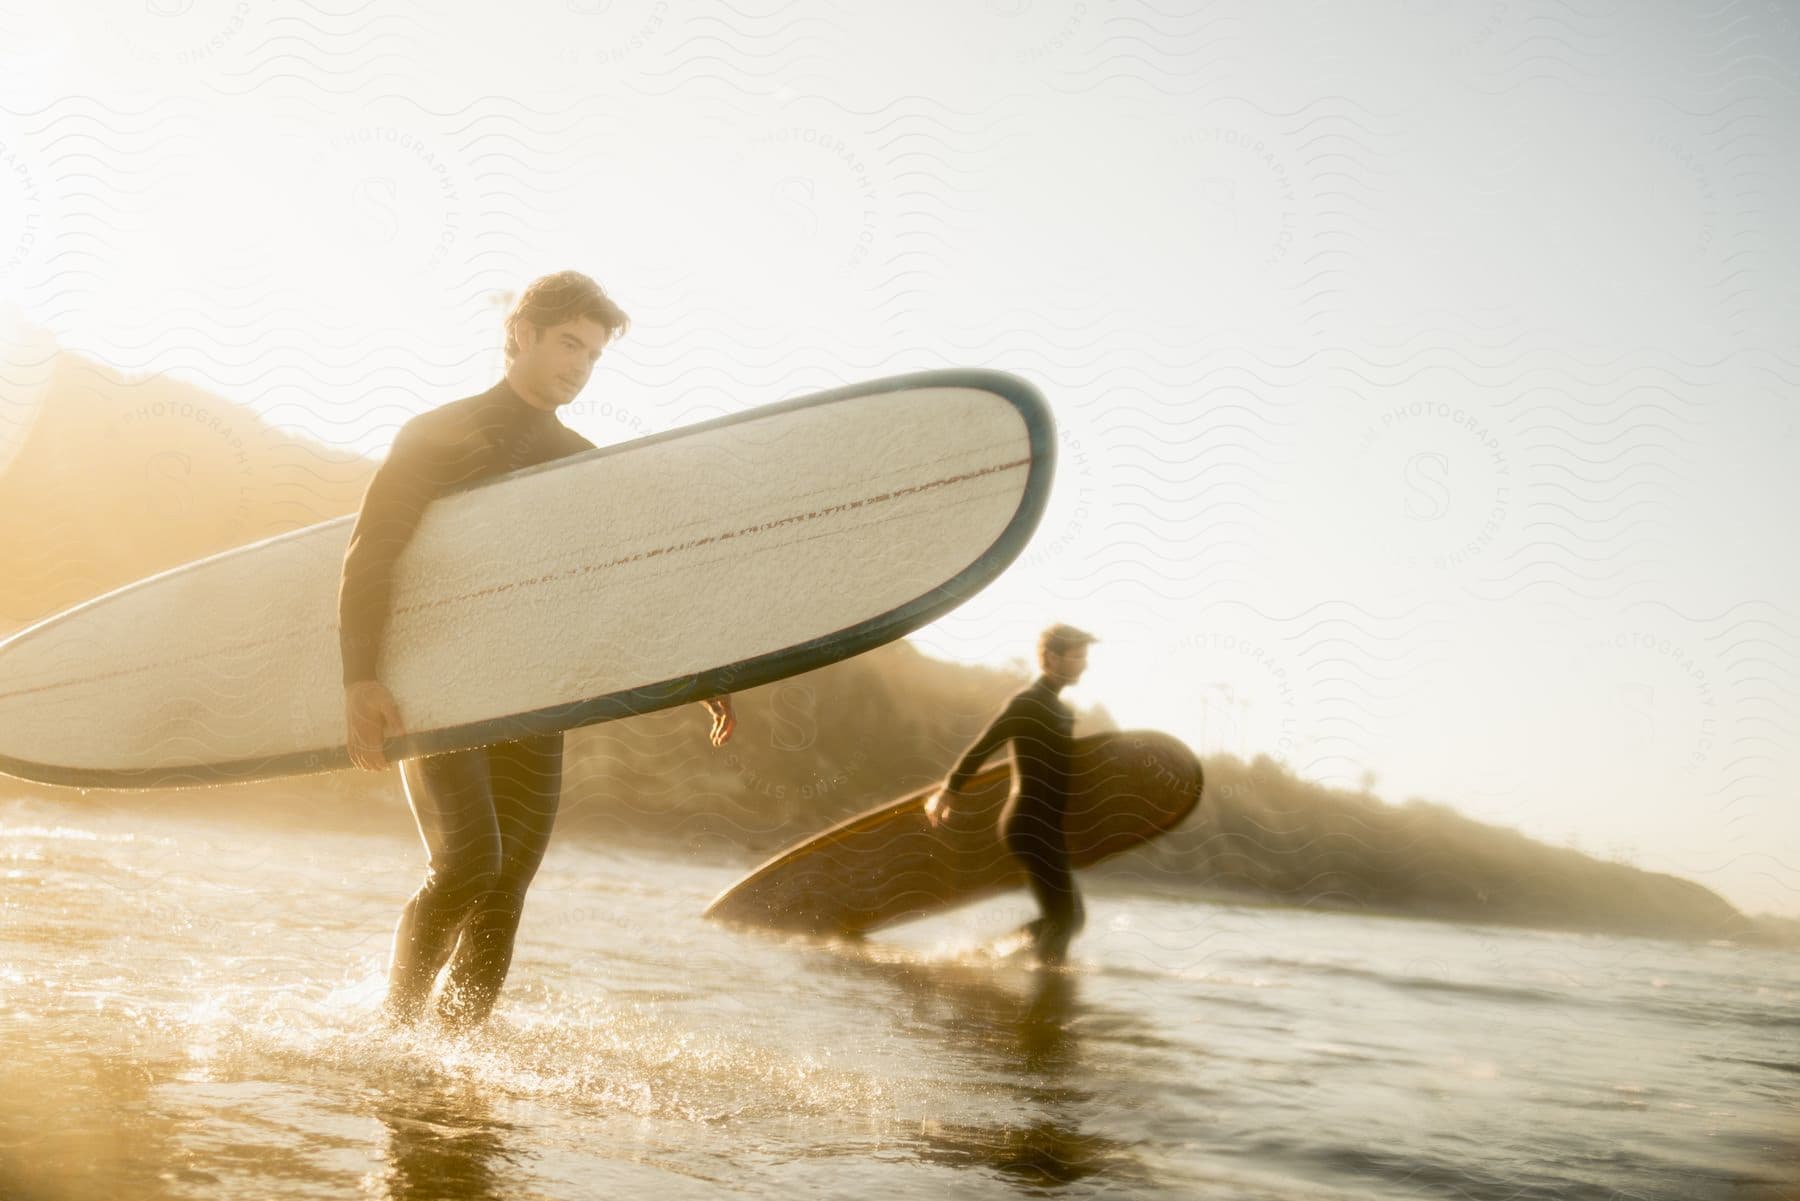 Two surfers in wetsuits walk in ankle deep ocean water while carrying their surfboards.